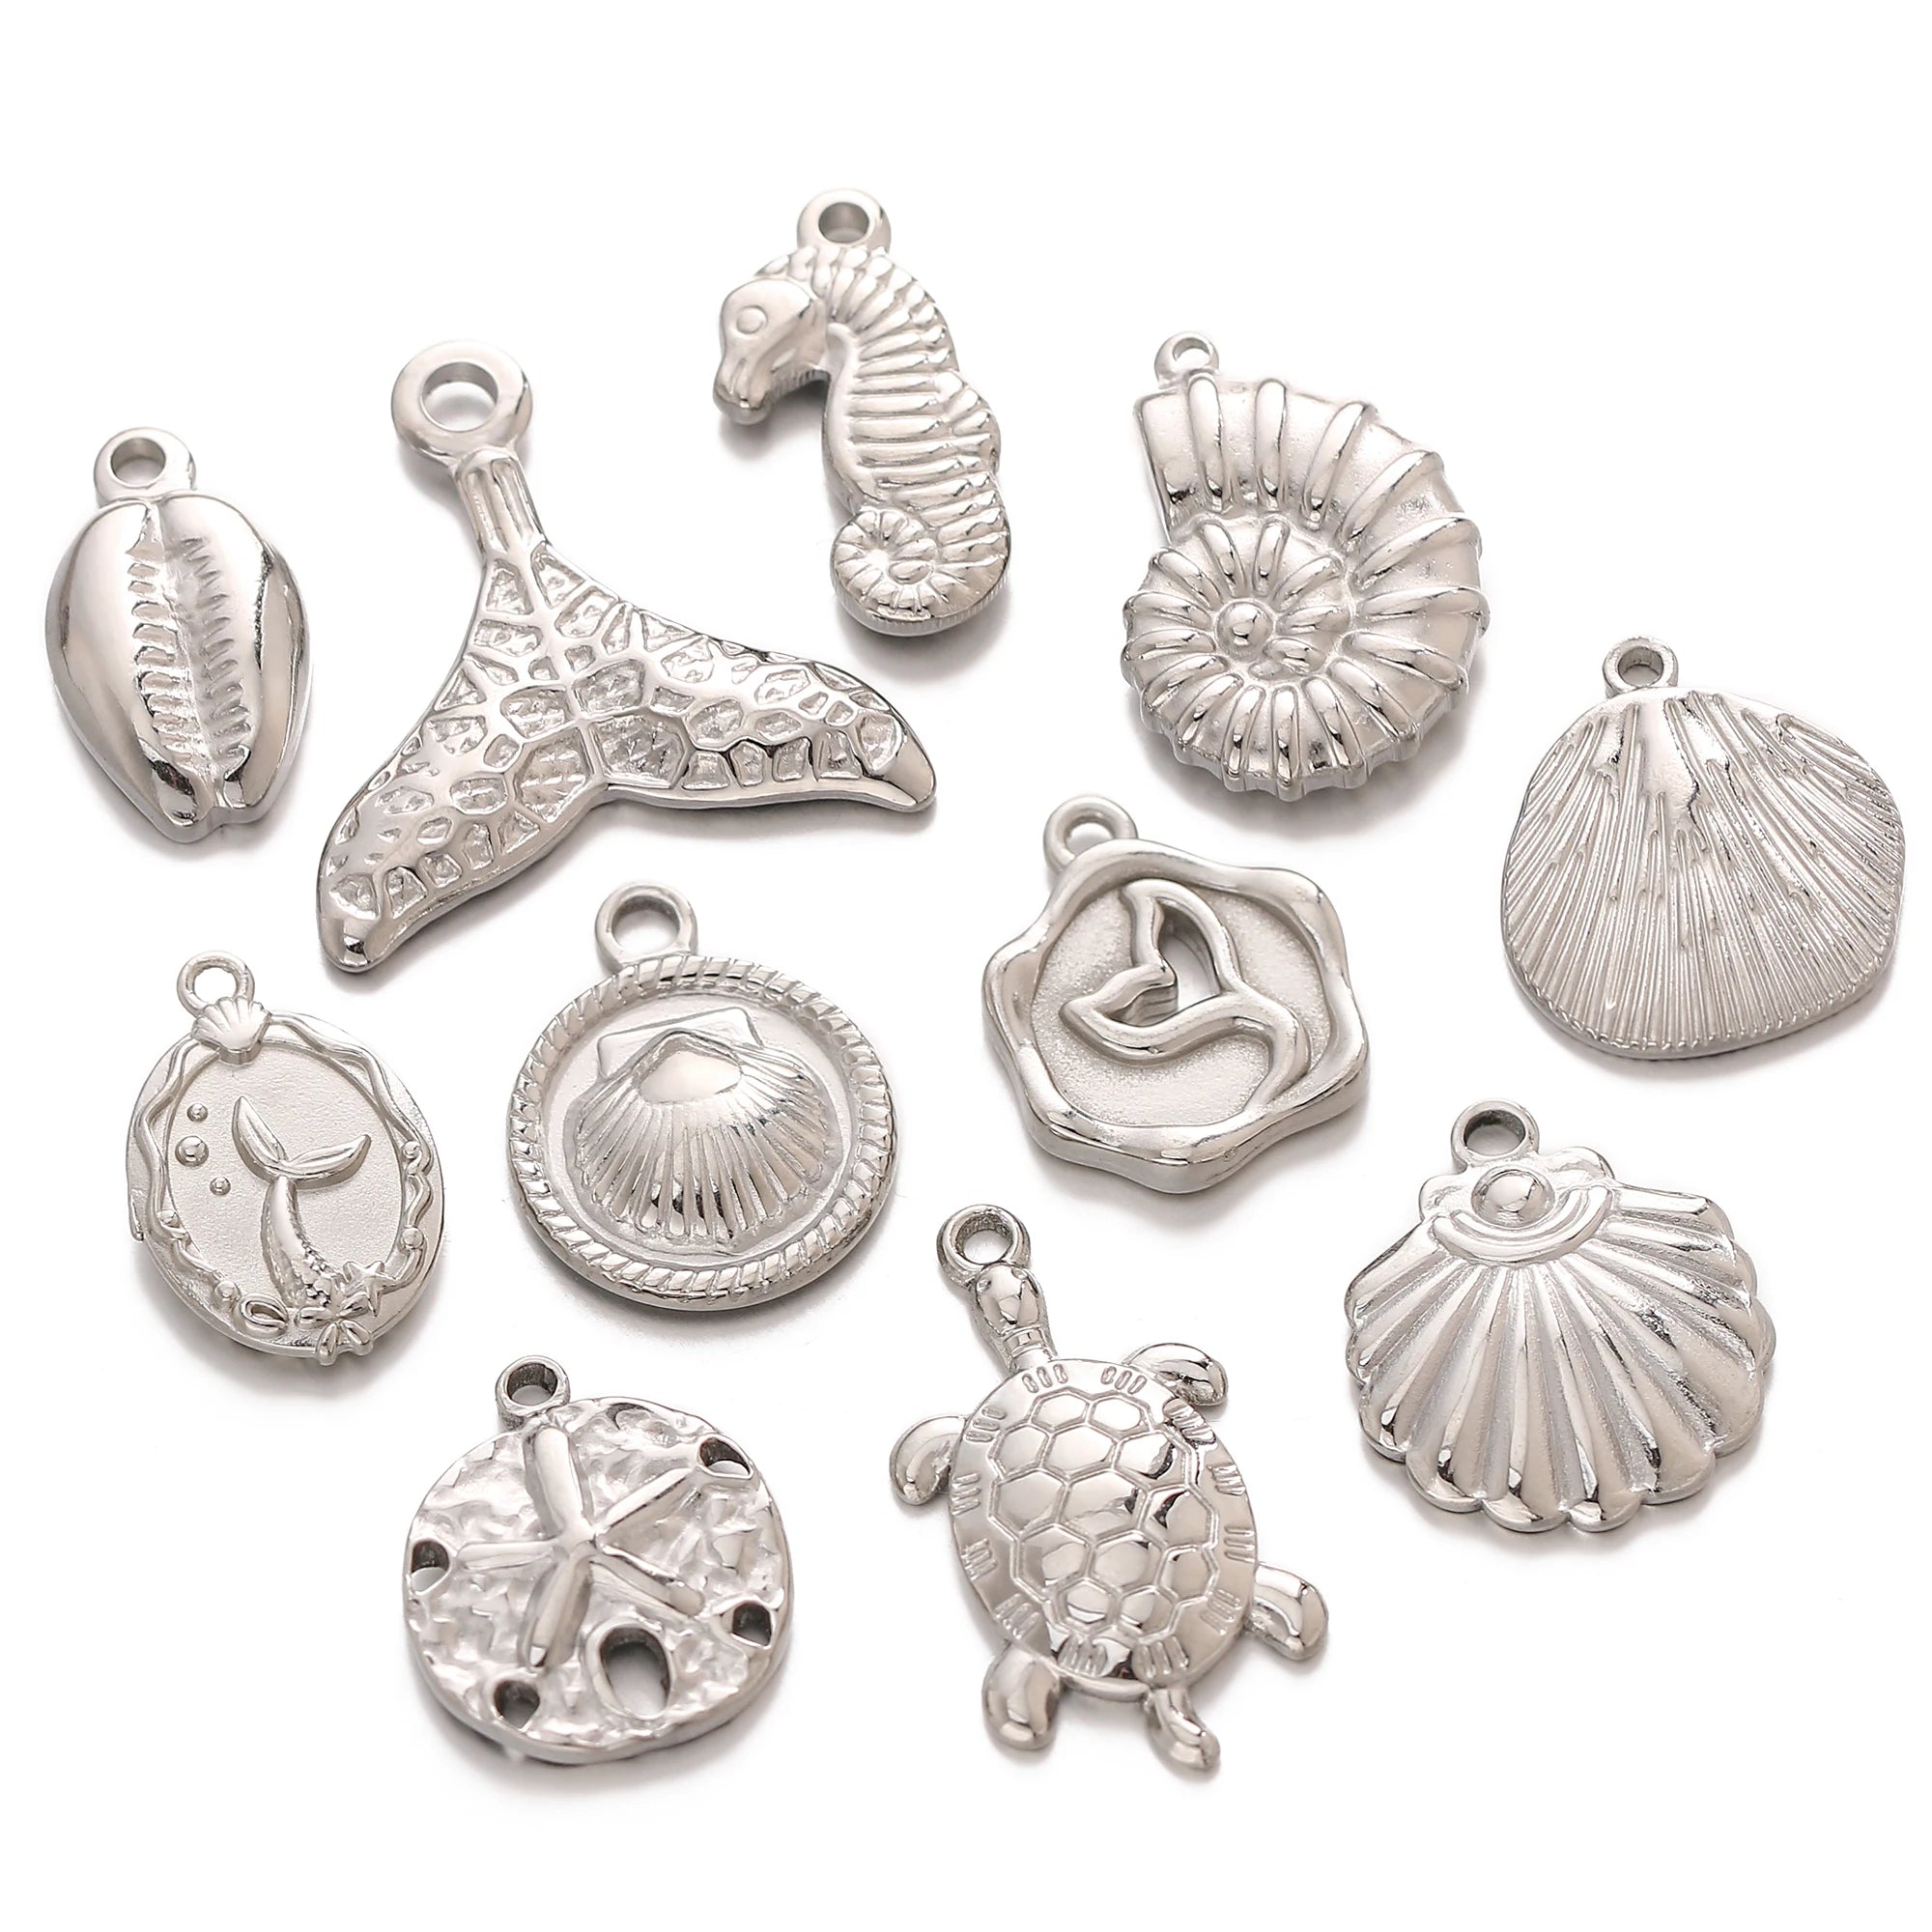 Ocean Life Shell / Turtle / Conch / Starfish / Fish Tail Pendants For DIY Earrings, Necklaces or Bracelets - Madeinsea©